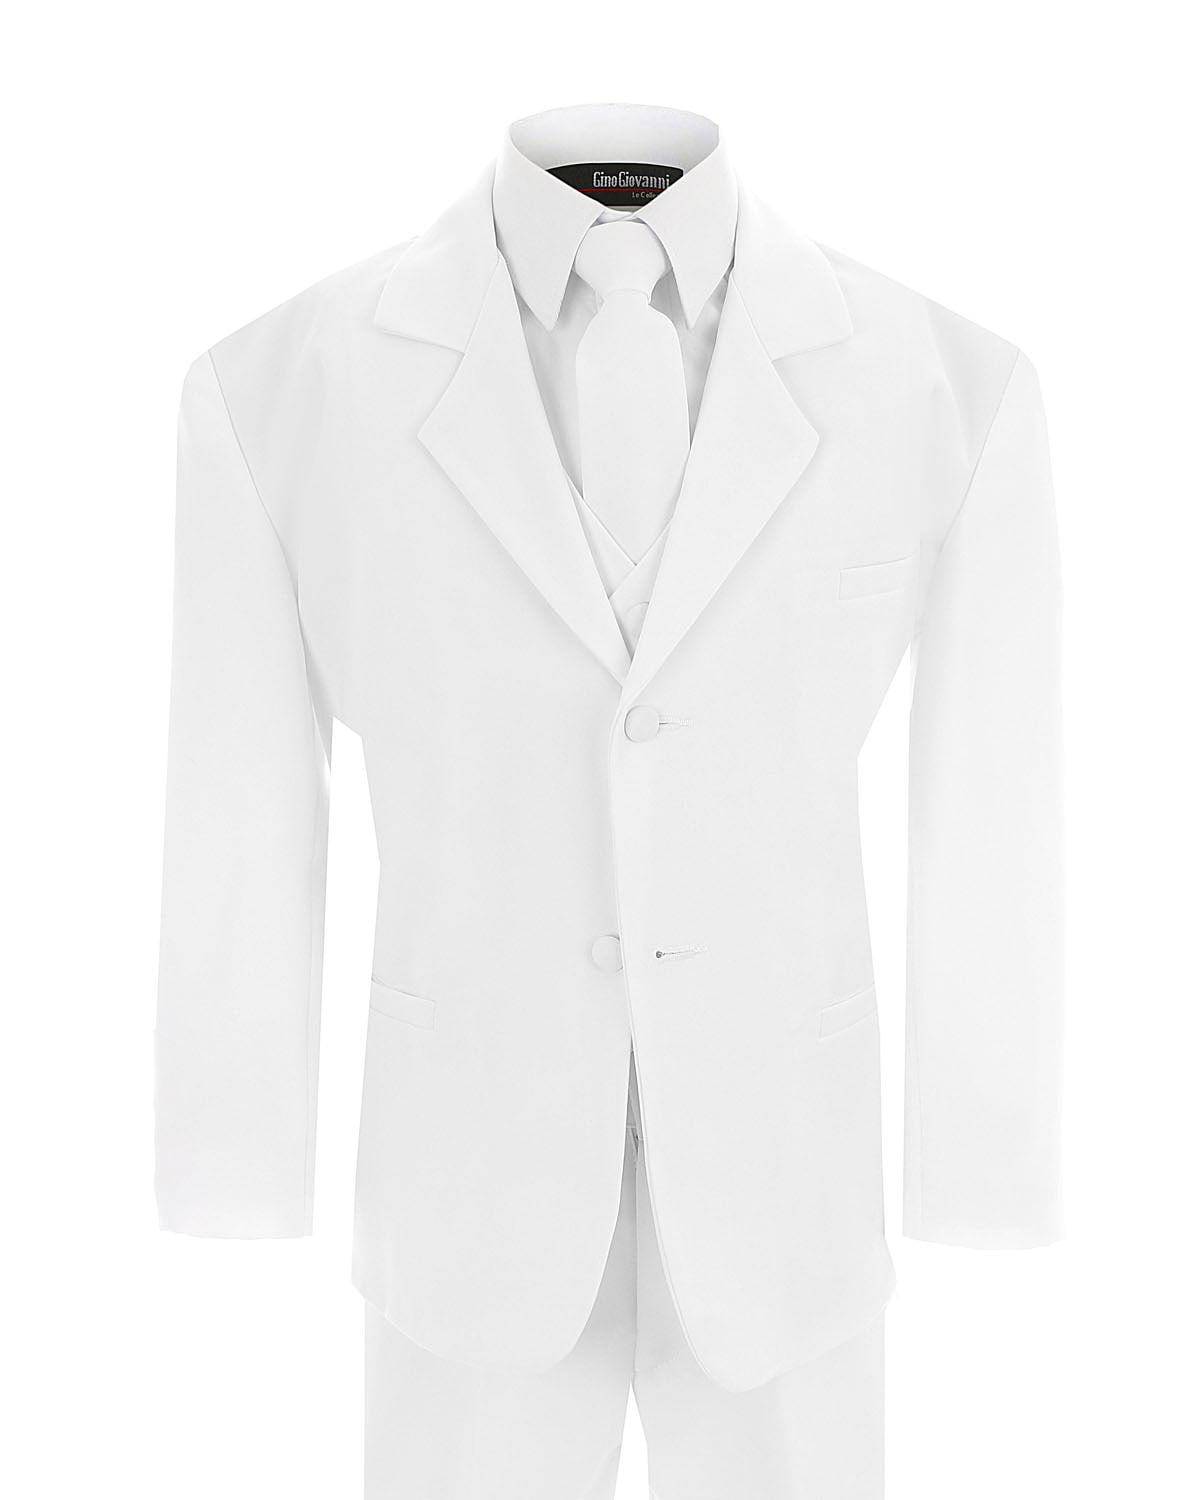 Gino Giovanni Formal White Dress Shirt for Boys From Baby to Teen 